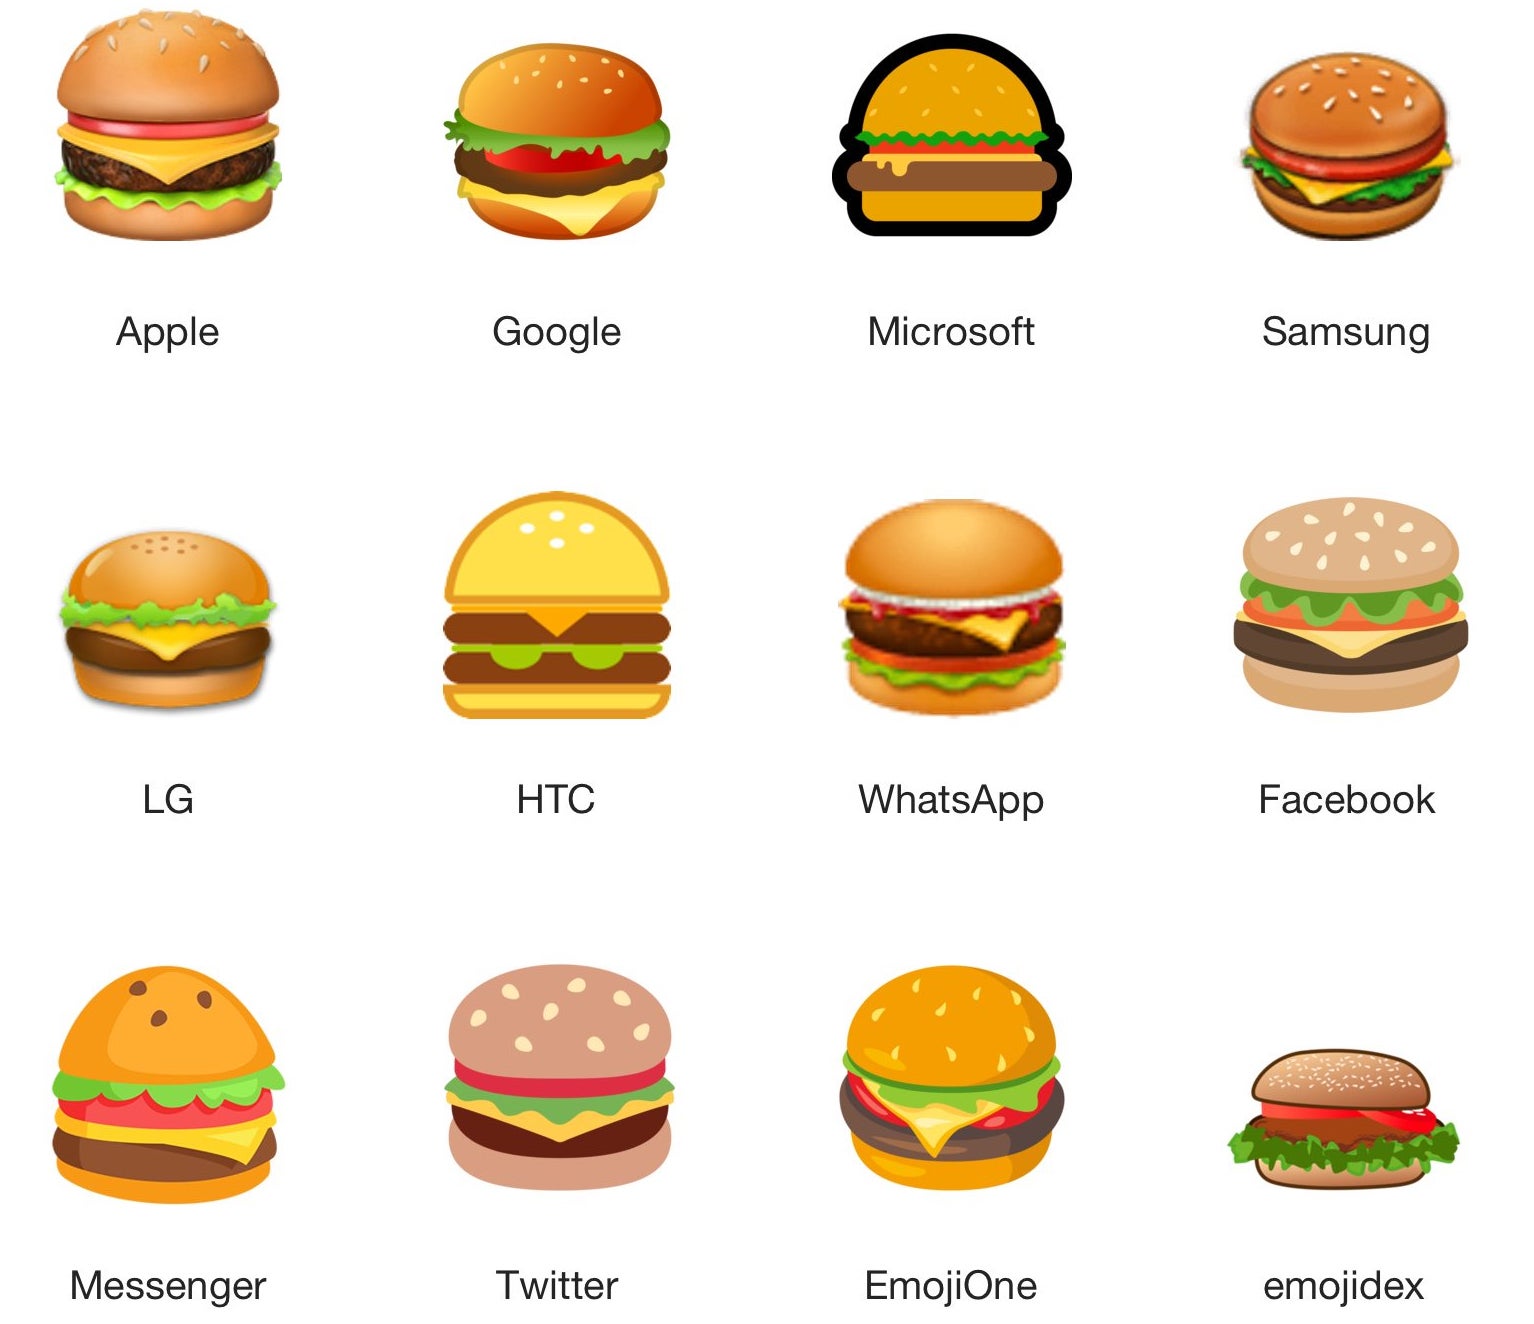 Google fixes burger and beer emojis in Android 8.1